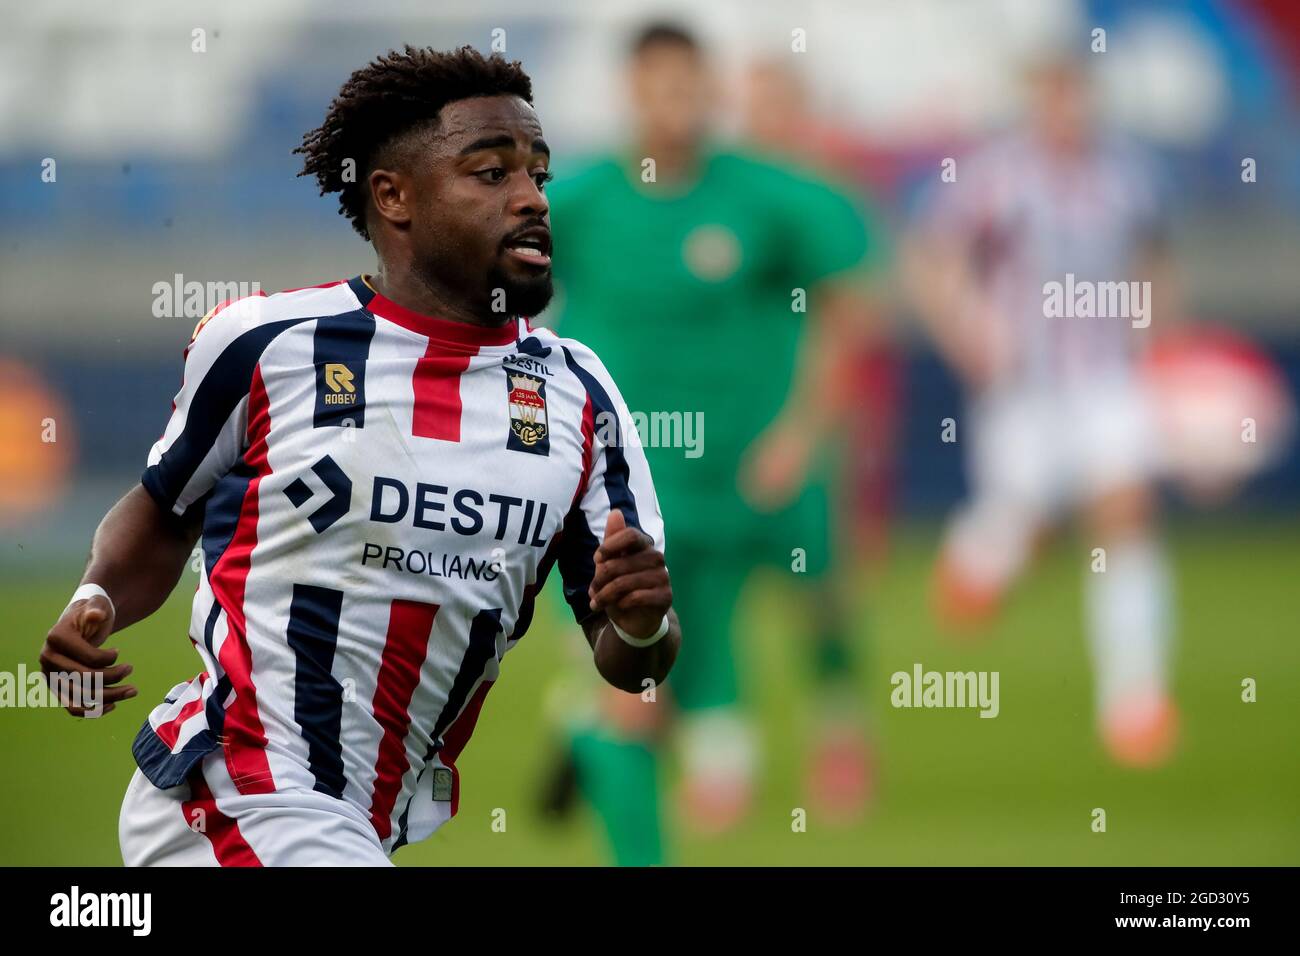 TILBURG, NETHERLANDS - AUGUST 10: Che Nunnely of Willem II during the Pre-season Friendly match between Willem II and Royal Excelsior Virton at the Koning Willem II Stadion on August 10, 2021 in Tilburg, Netherlands (Photo by Broer van den Boom/Orange Pictures) Stock Photo